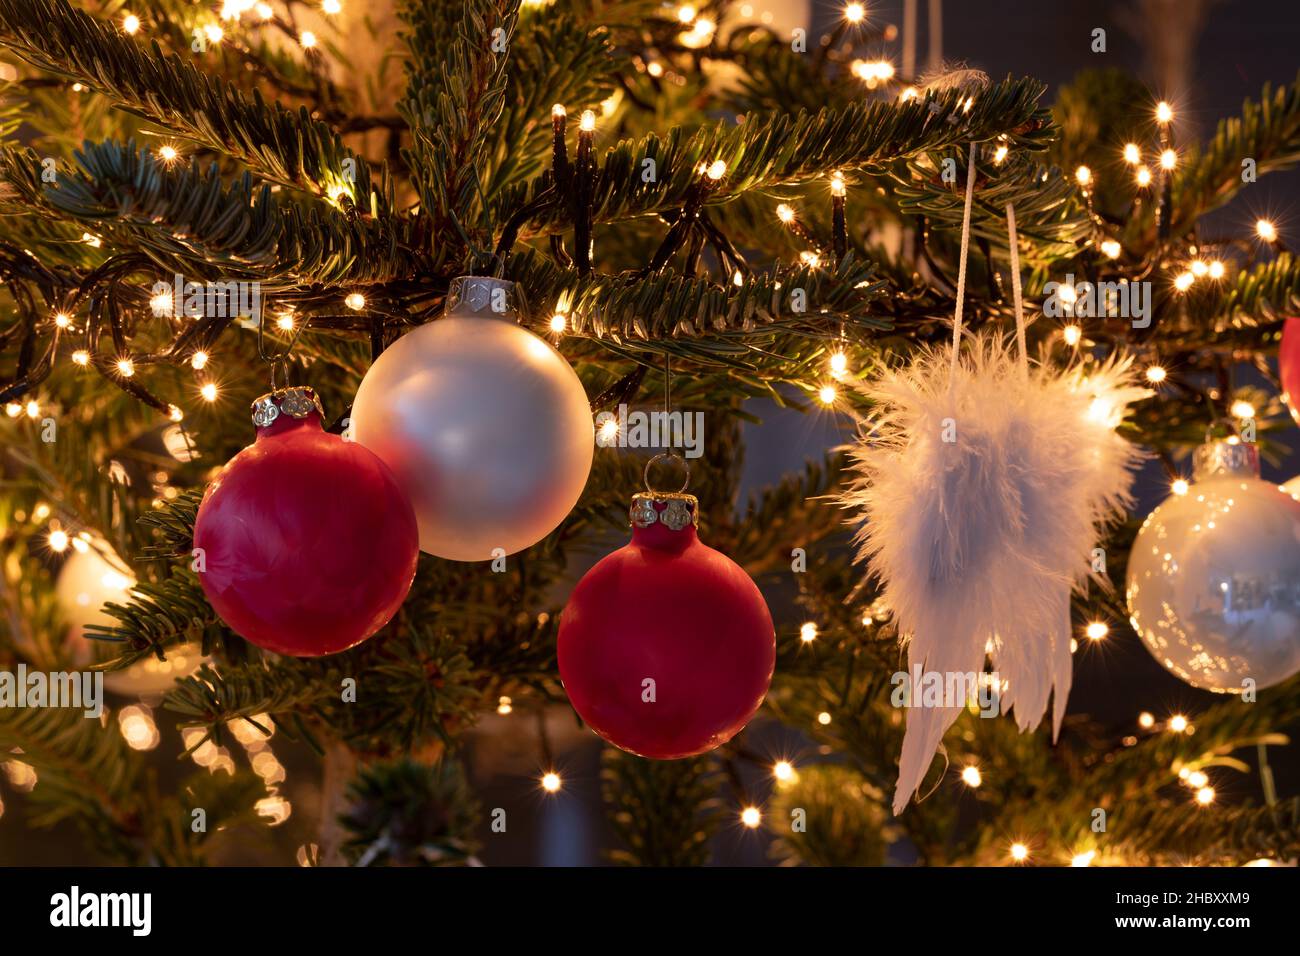 Christmas tree with red and white balls as well as a chain of lights and angel wings Stock Photo